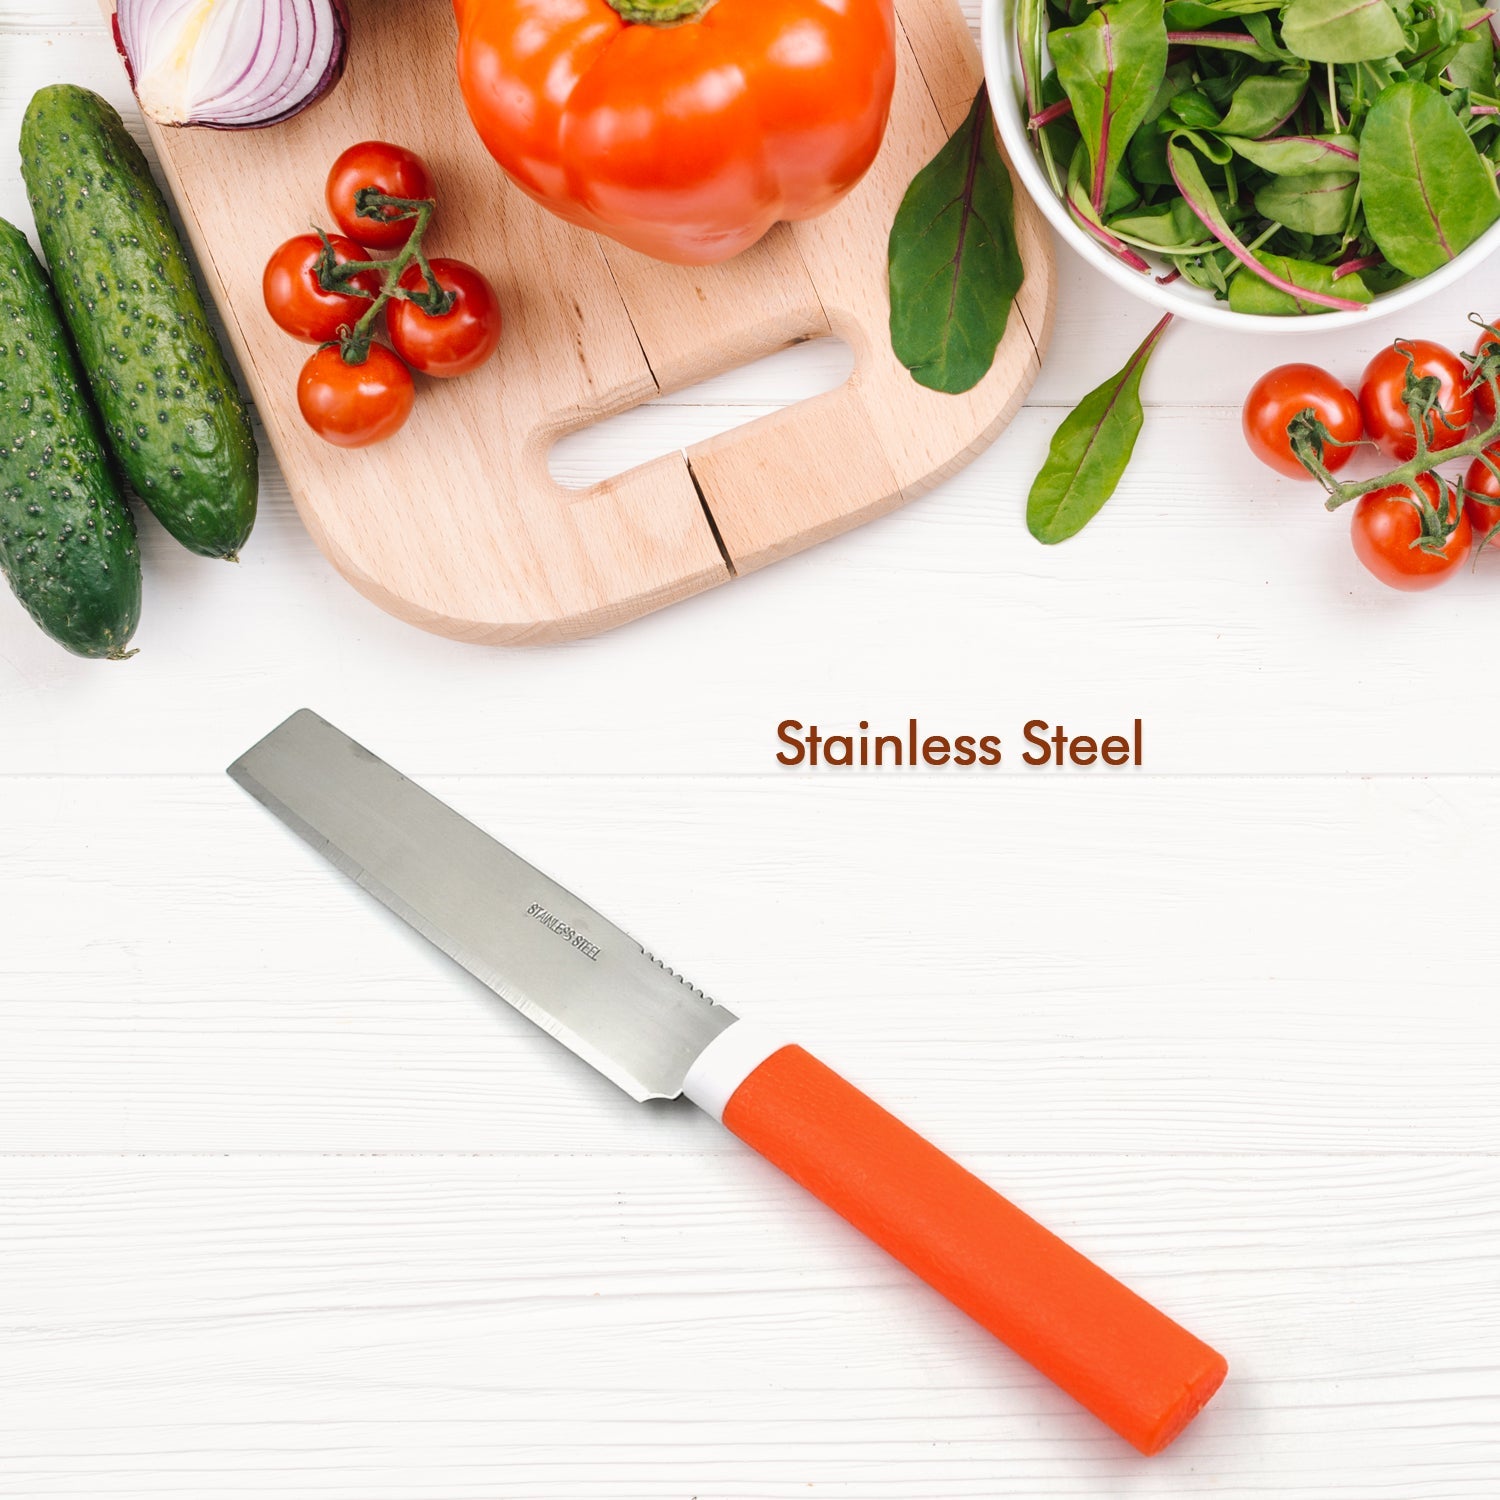 Stainless Steel Knife For Kitchen Use, Knife Set, Knife & Non-Slip Handle With Blade Cover Knife